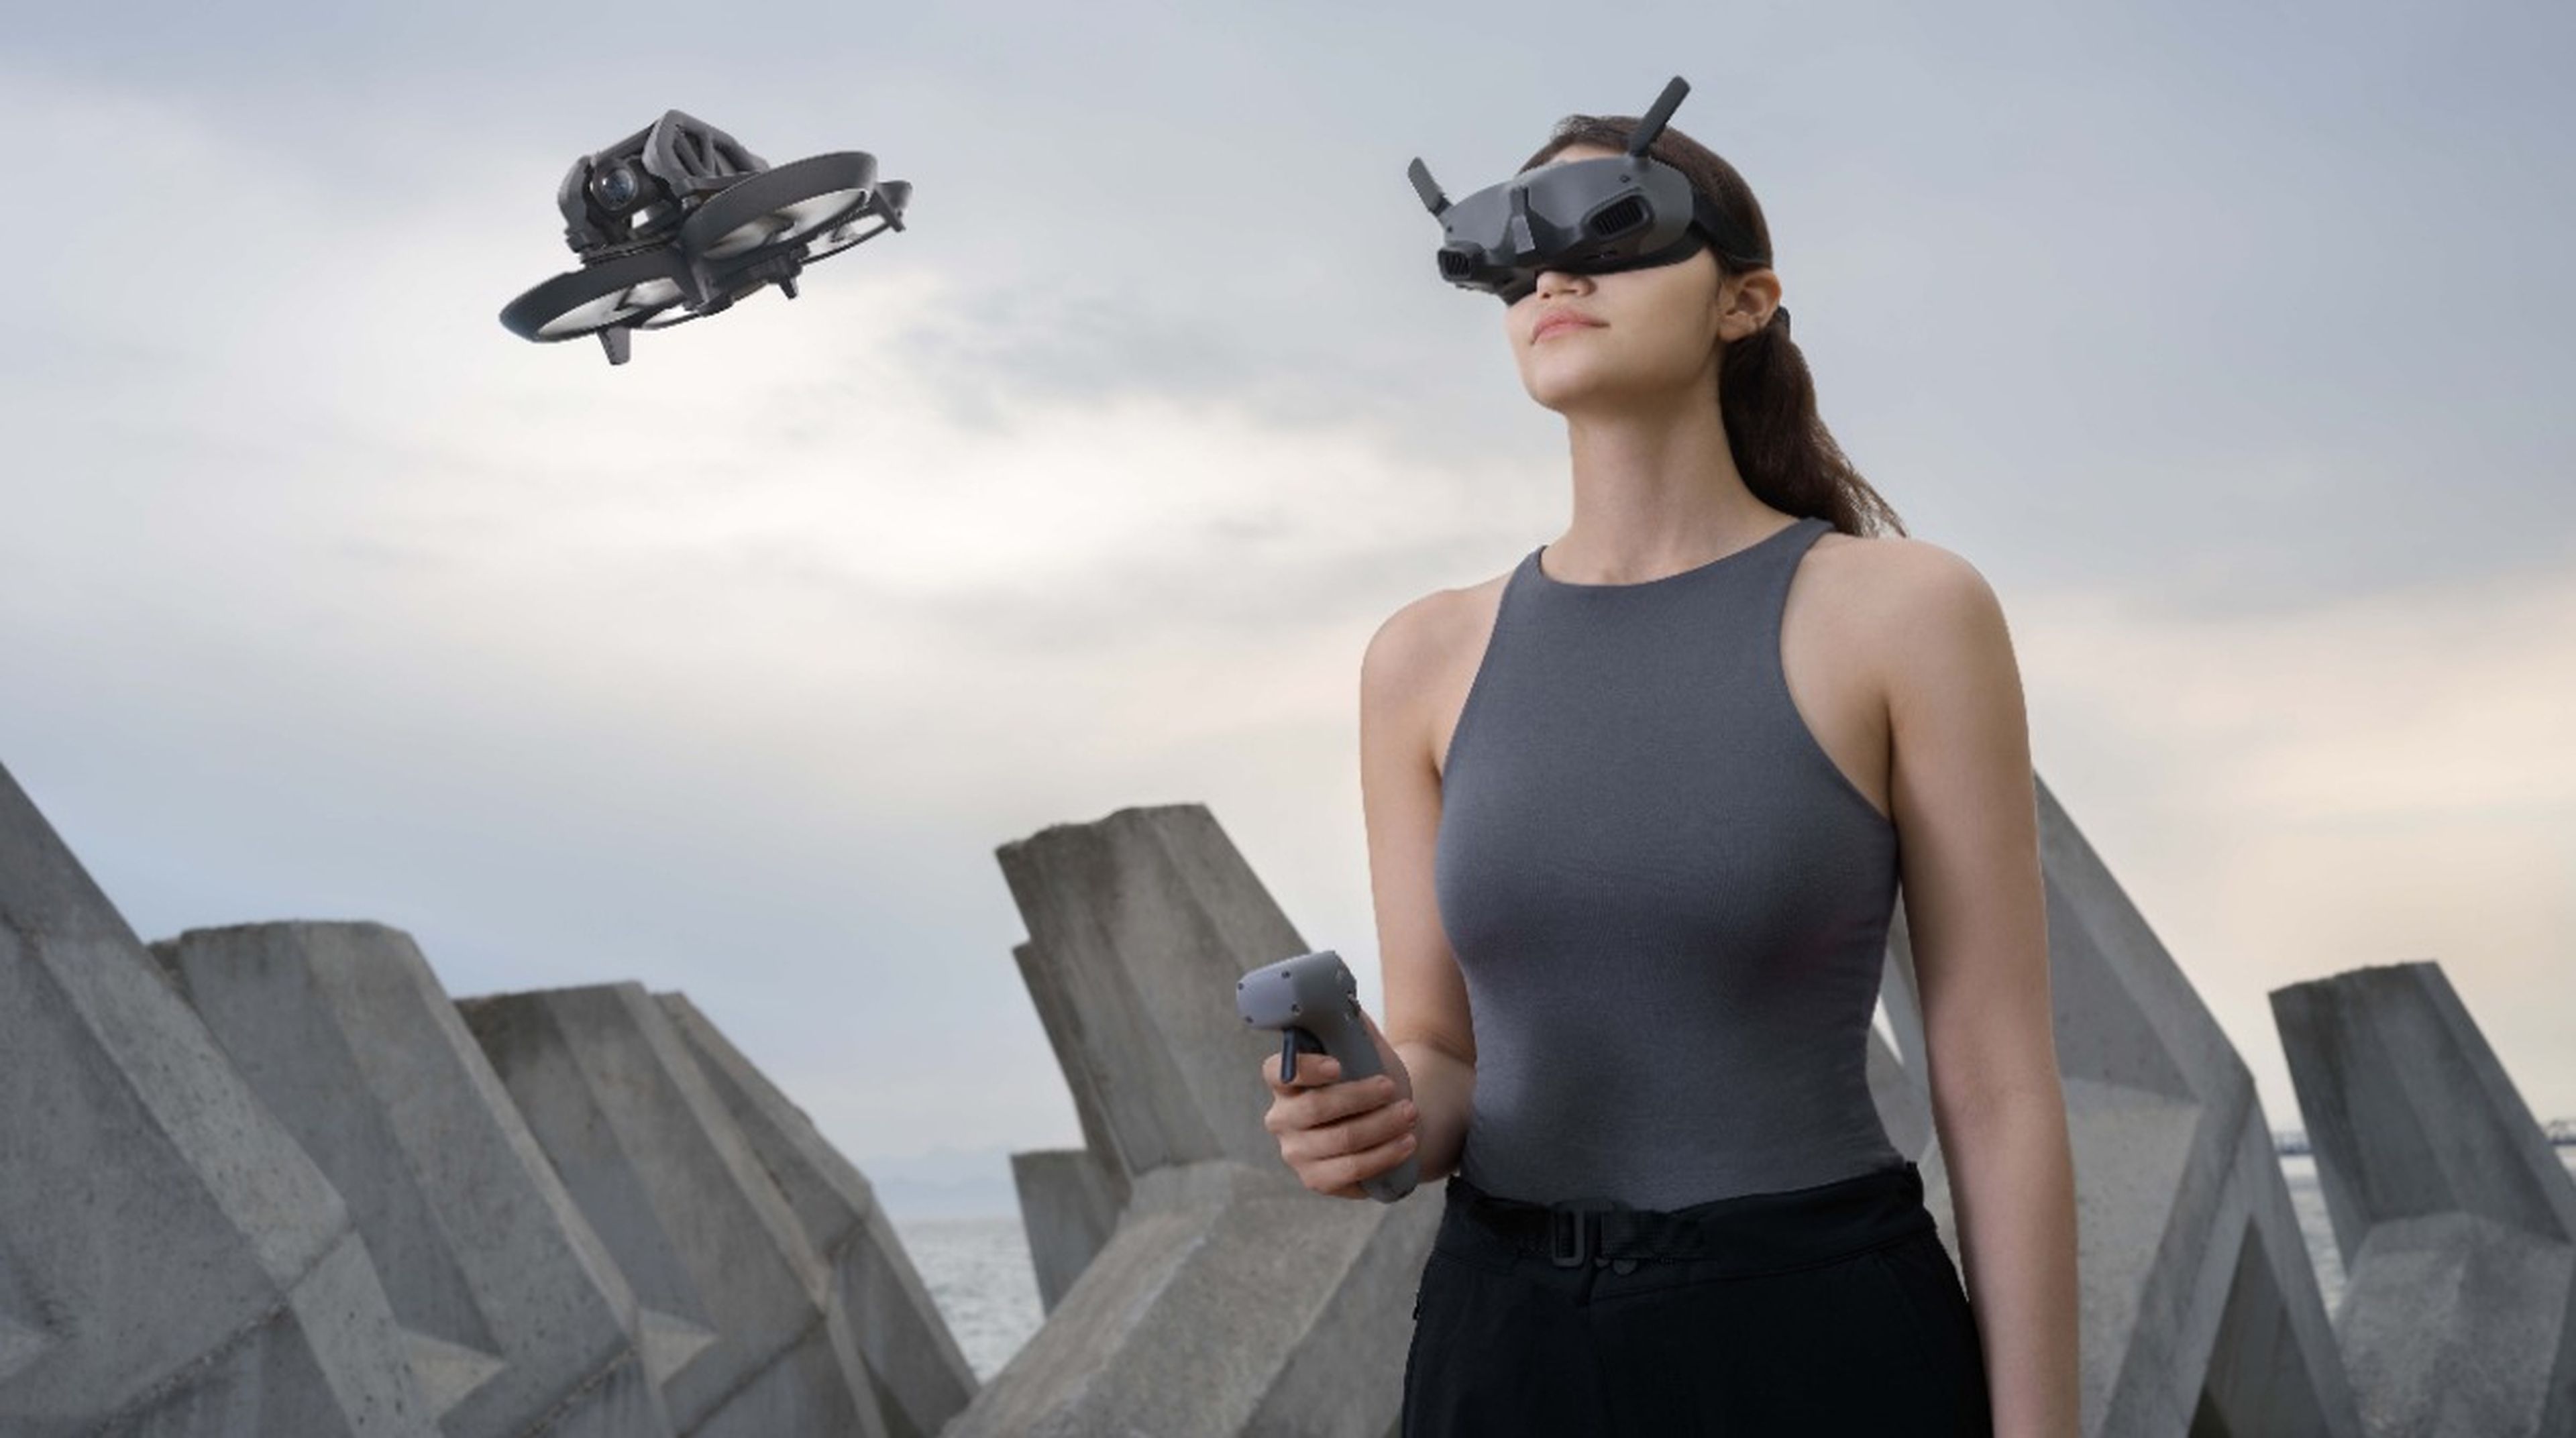 DJI announces new FPV goggles and improved controller to take the drone flight experience to another level